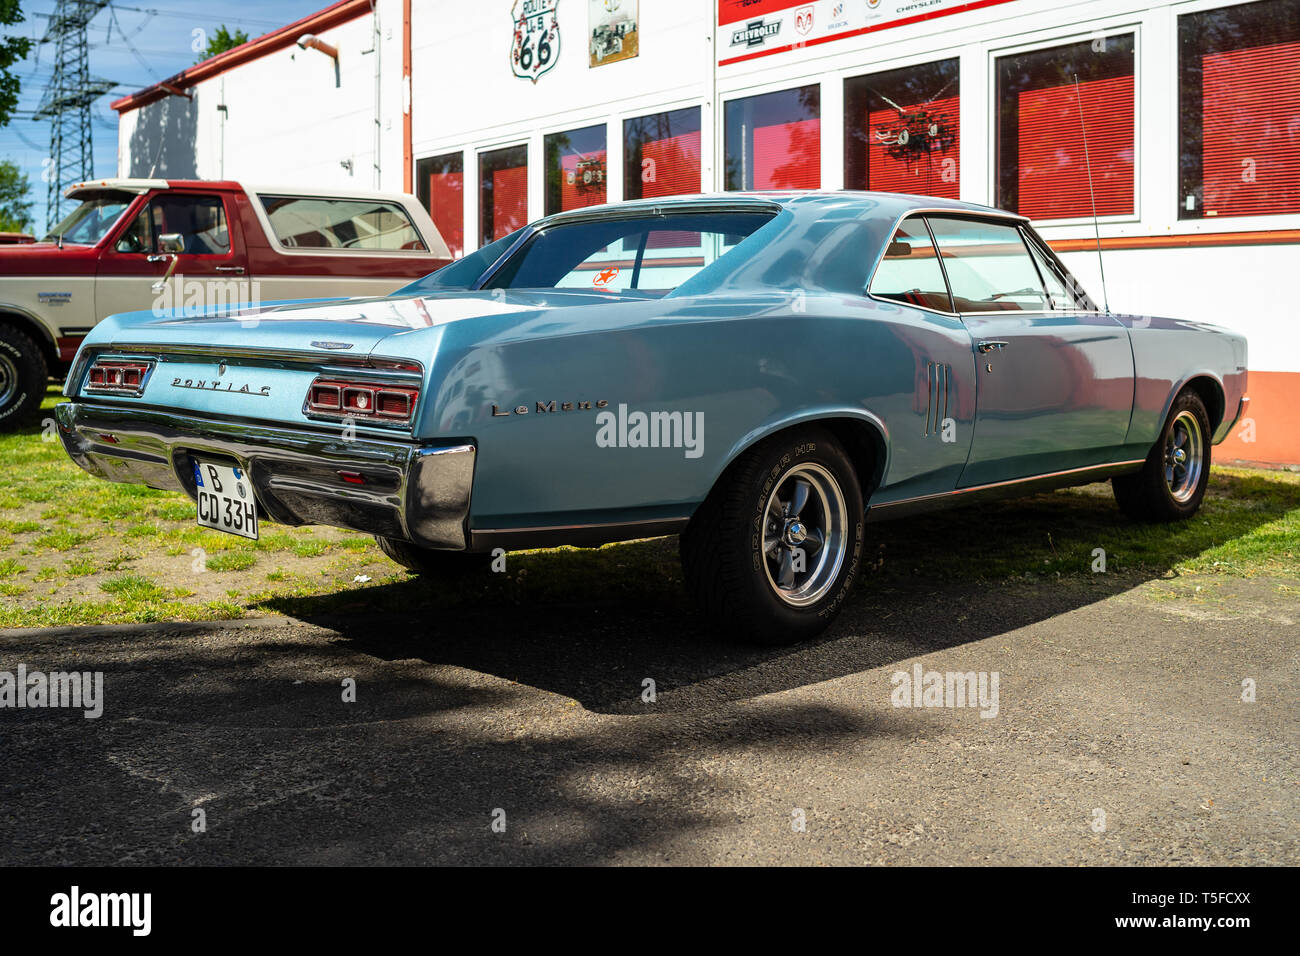 BERLIN - MAY 05, 2018: The mid-size car Pontiac LeMans, 1967. Rear view. Stock Photo